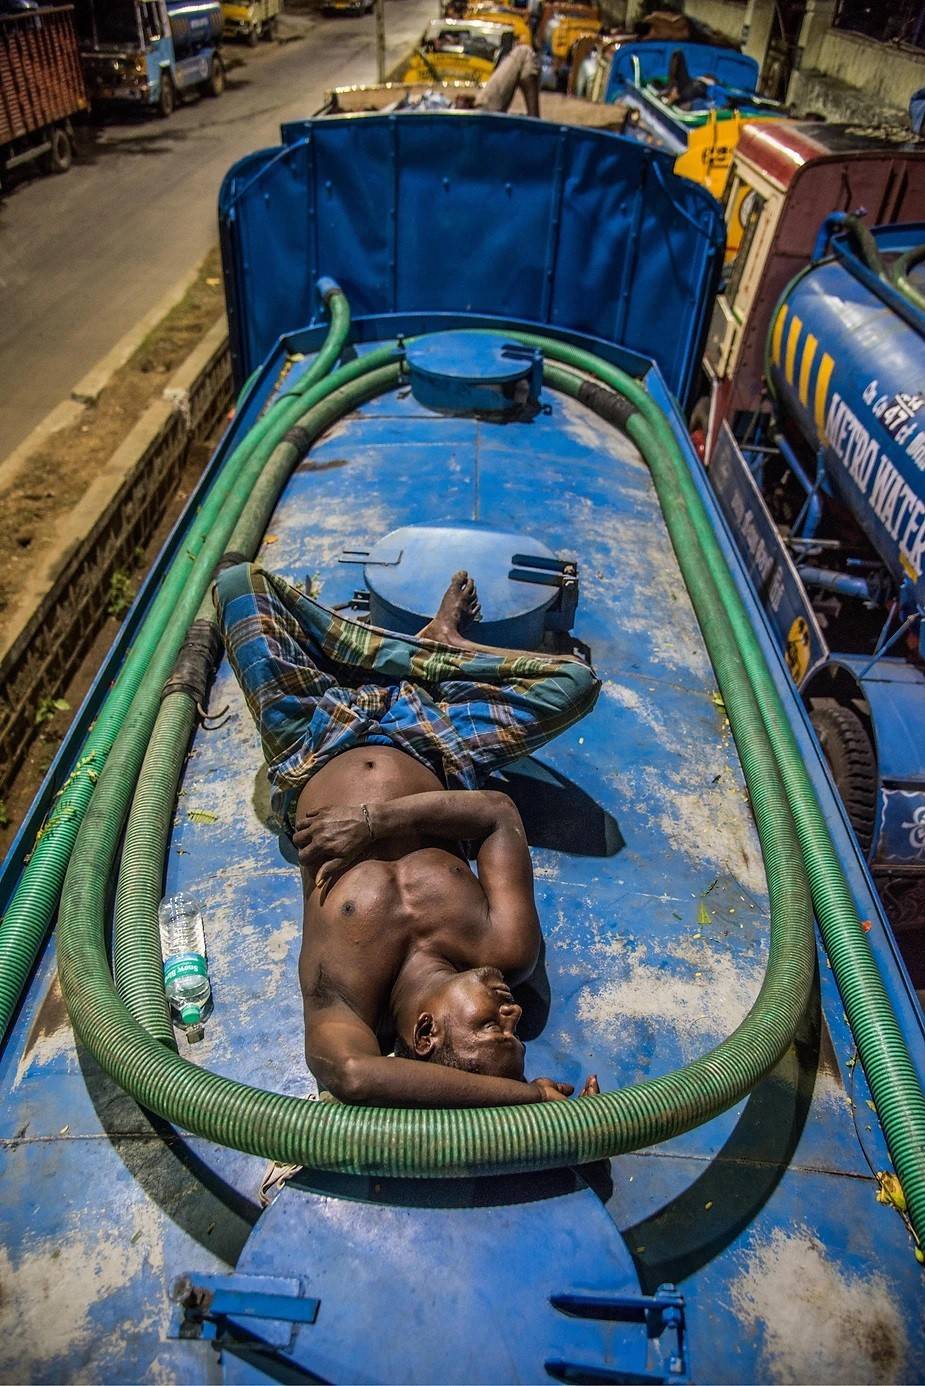 A tired driver sleeping on his water tanker in K.K.Nagar Metro water pumping station, Chennai. Photo by: Steevez Rodriguez/PEP Collective.